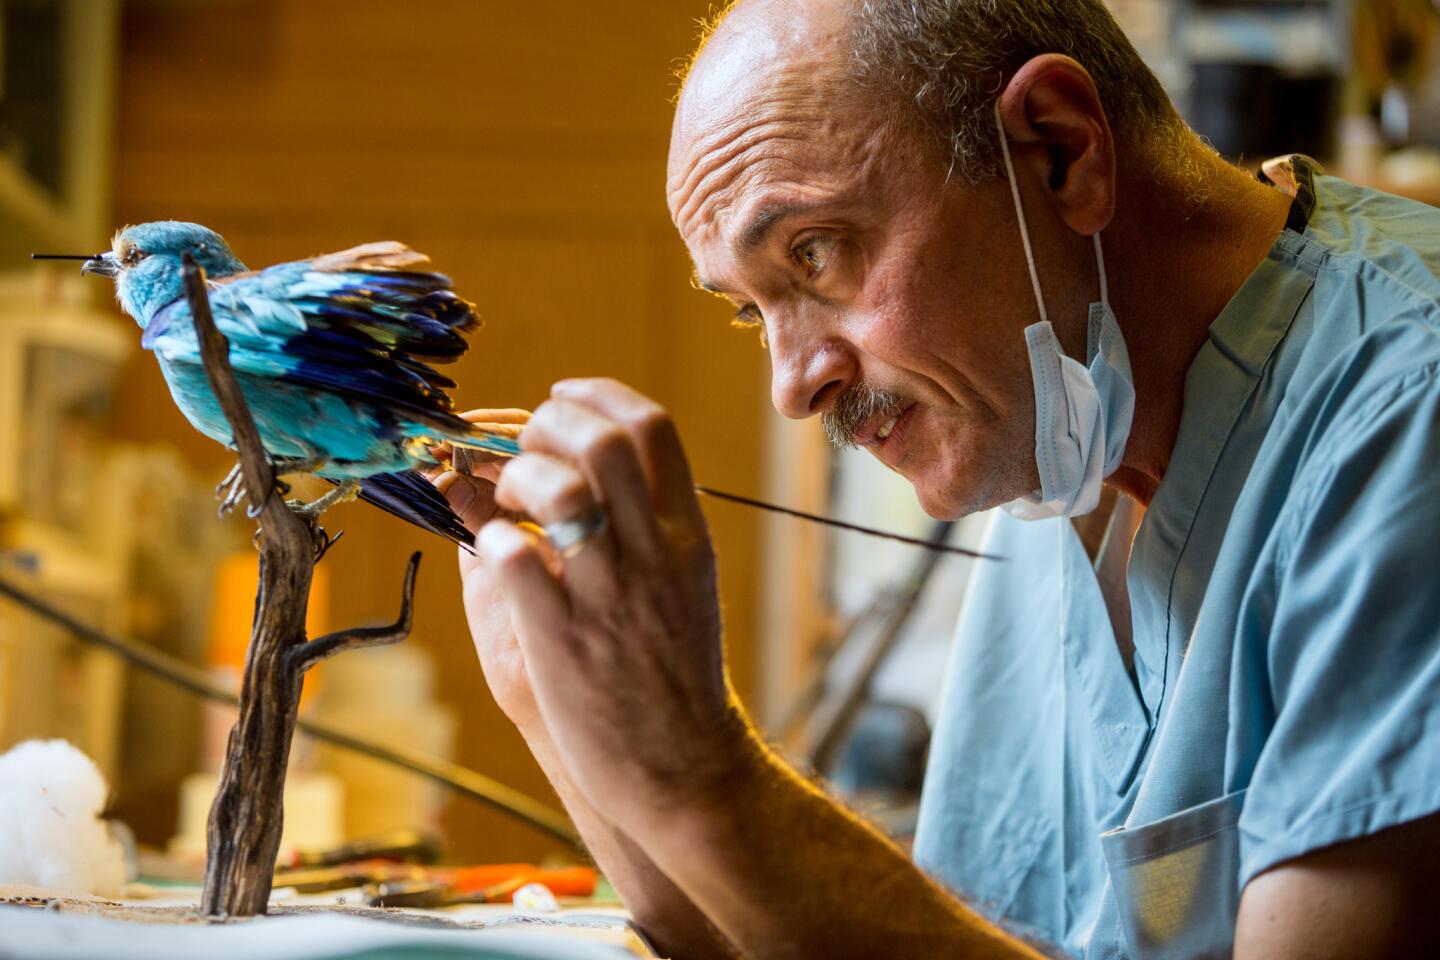 Igor Caragodin spends much of his time fine-tuning the feather formation as he works on the mounted Abyssinian roller, from Burkino Faso, at his garage studio.